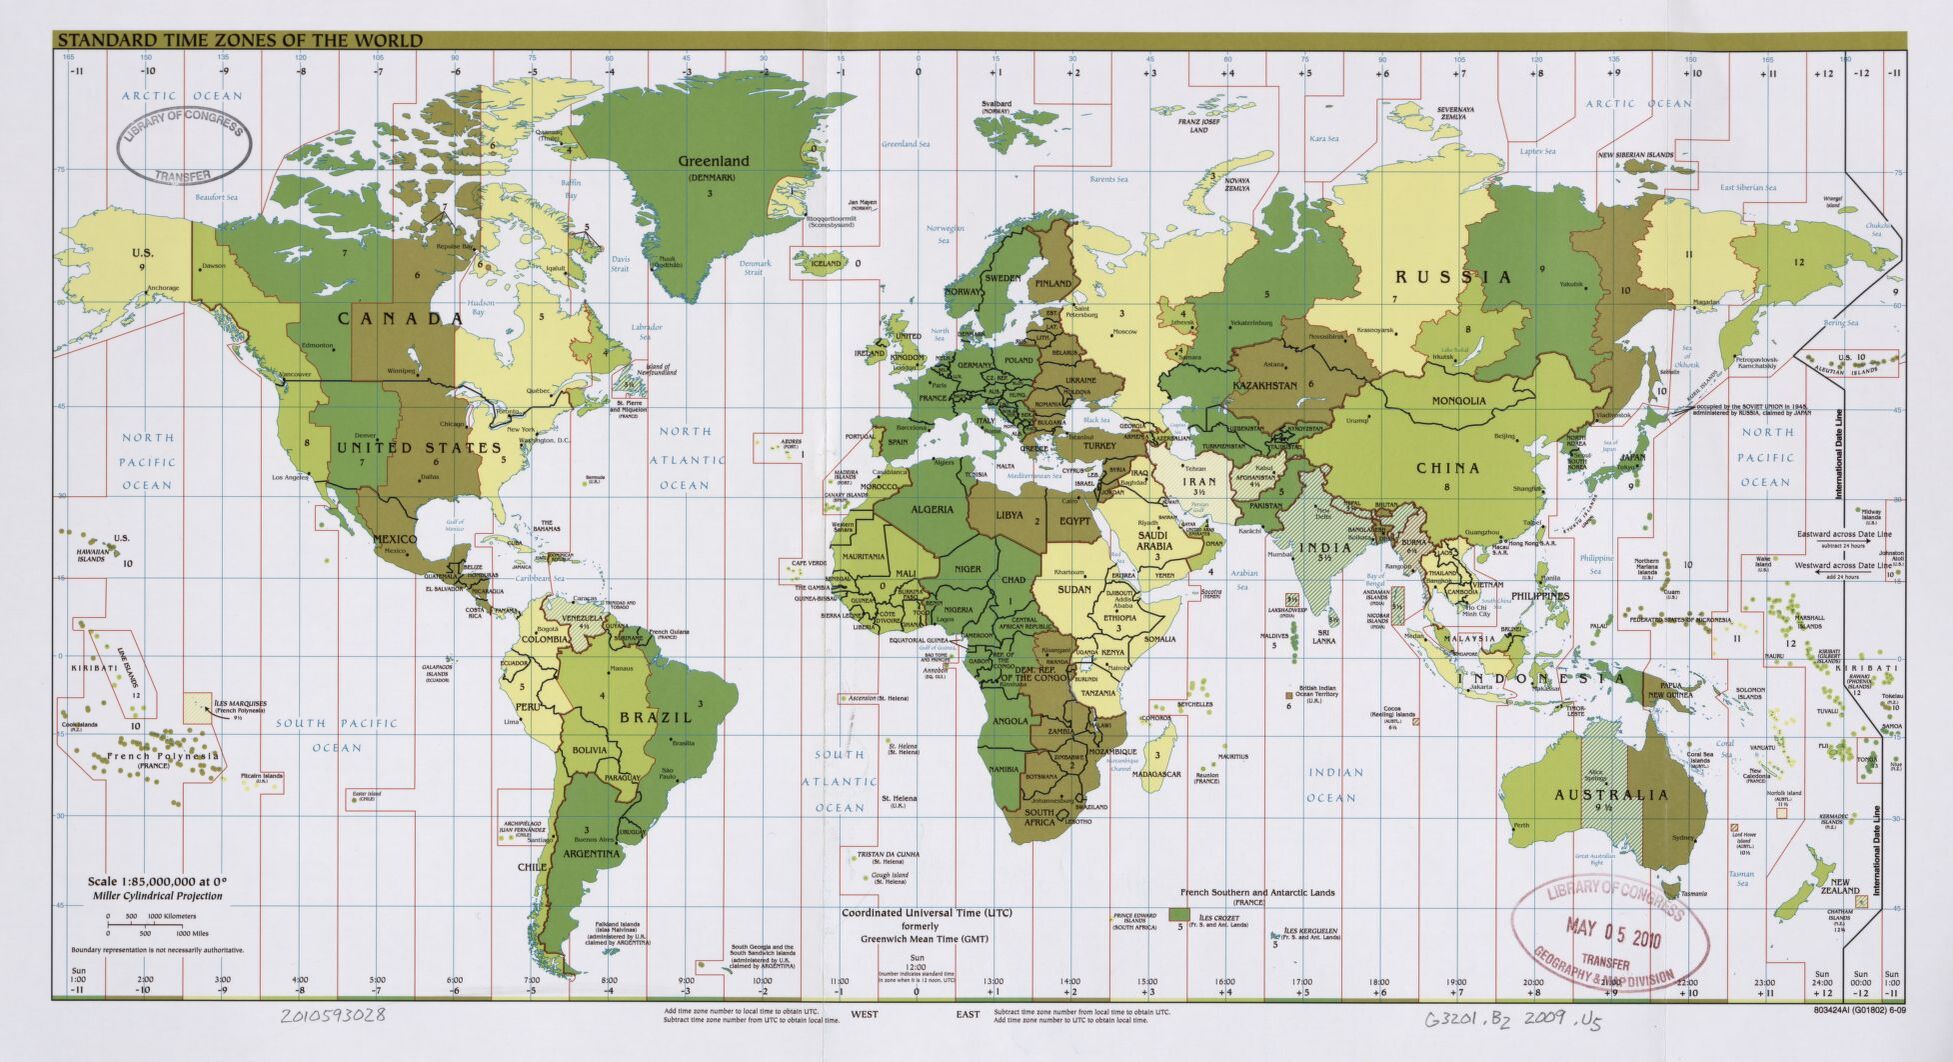 The World Standard time zones Map   | 2009 | Large, Printable Downloadable Map